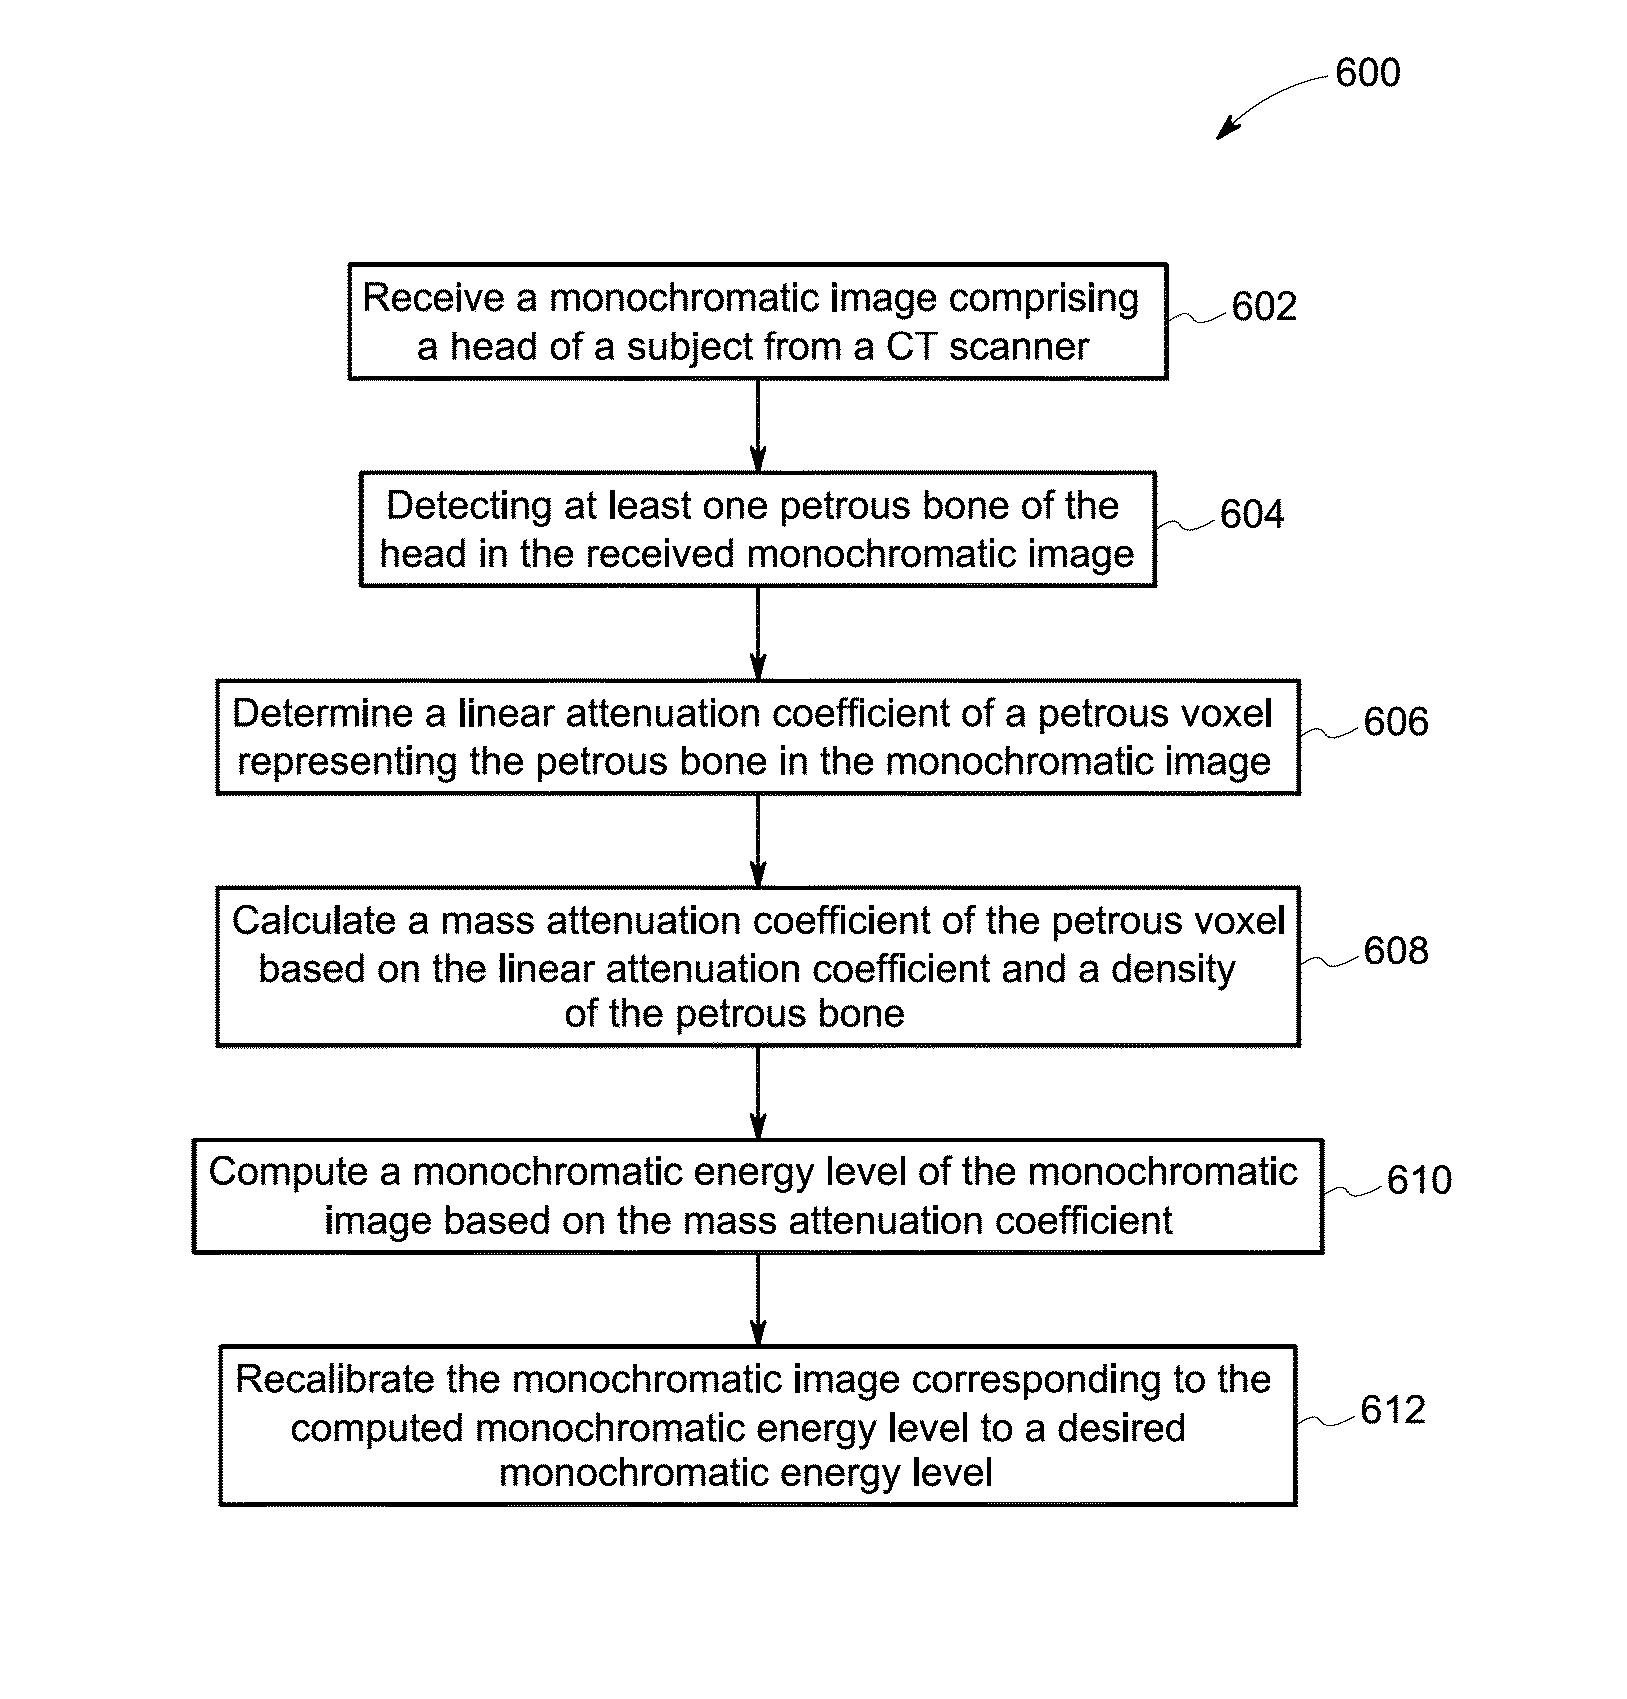 System and method for recalibrating a monochromatic image